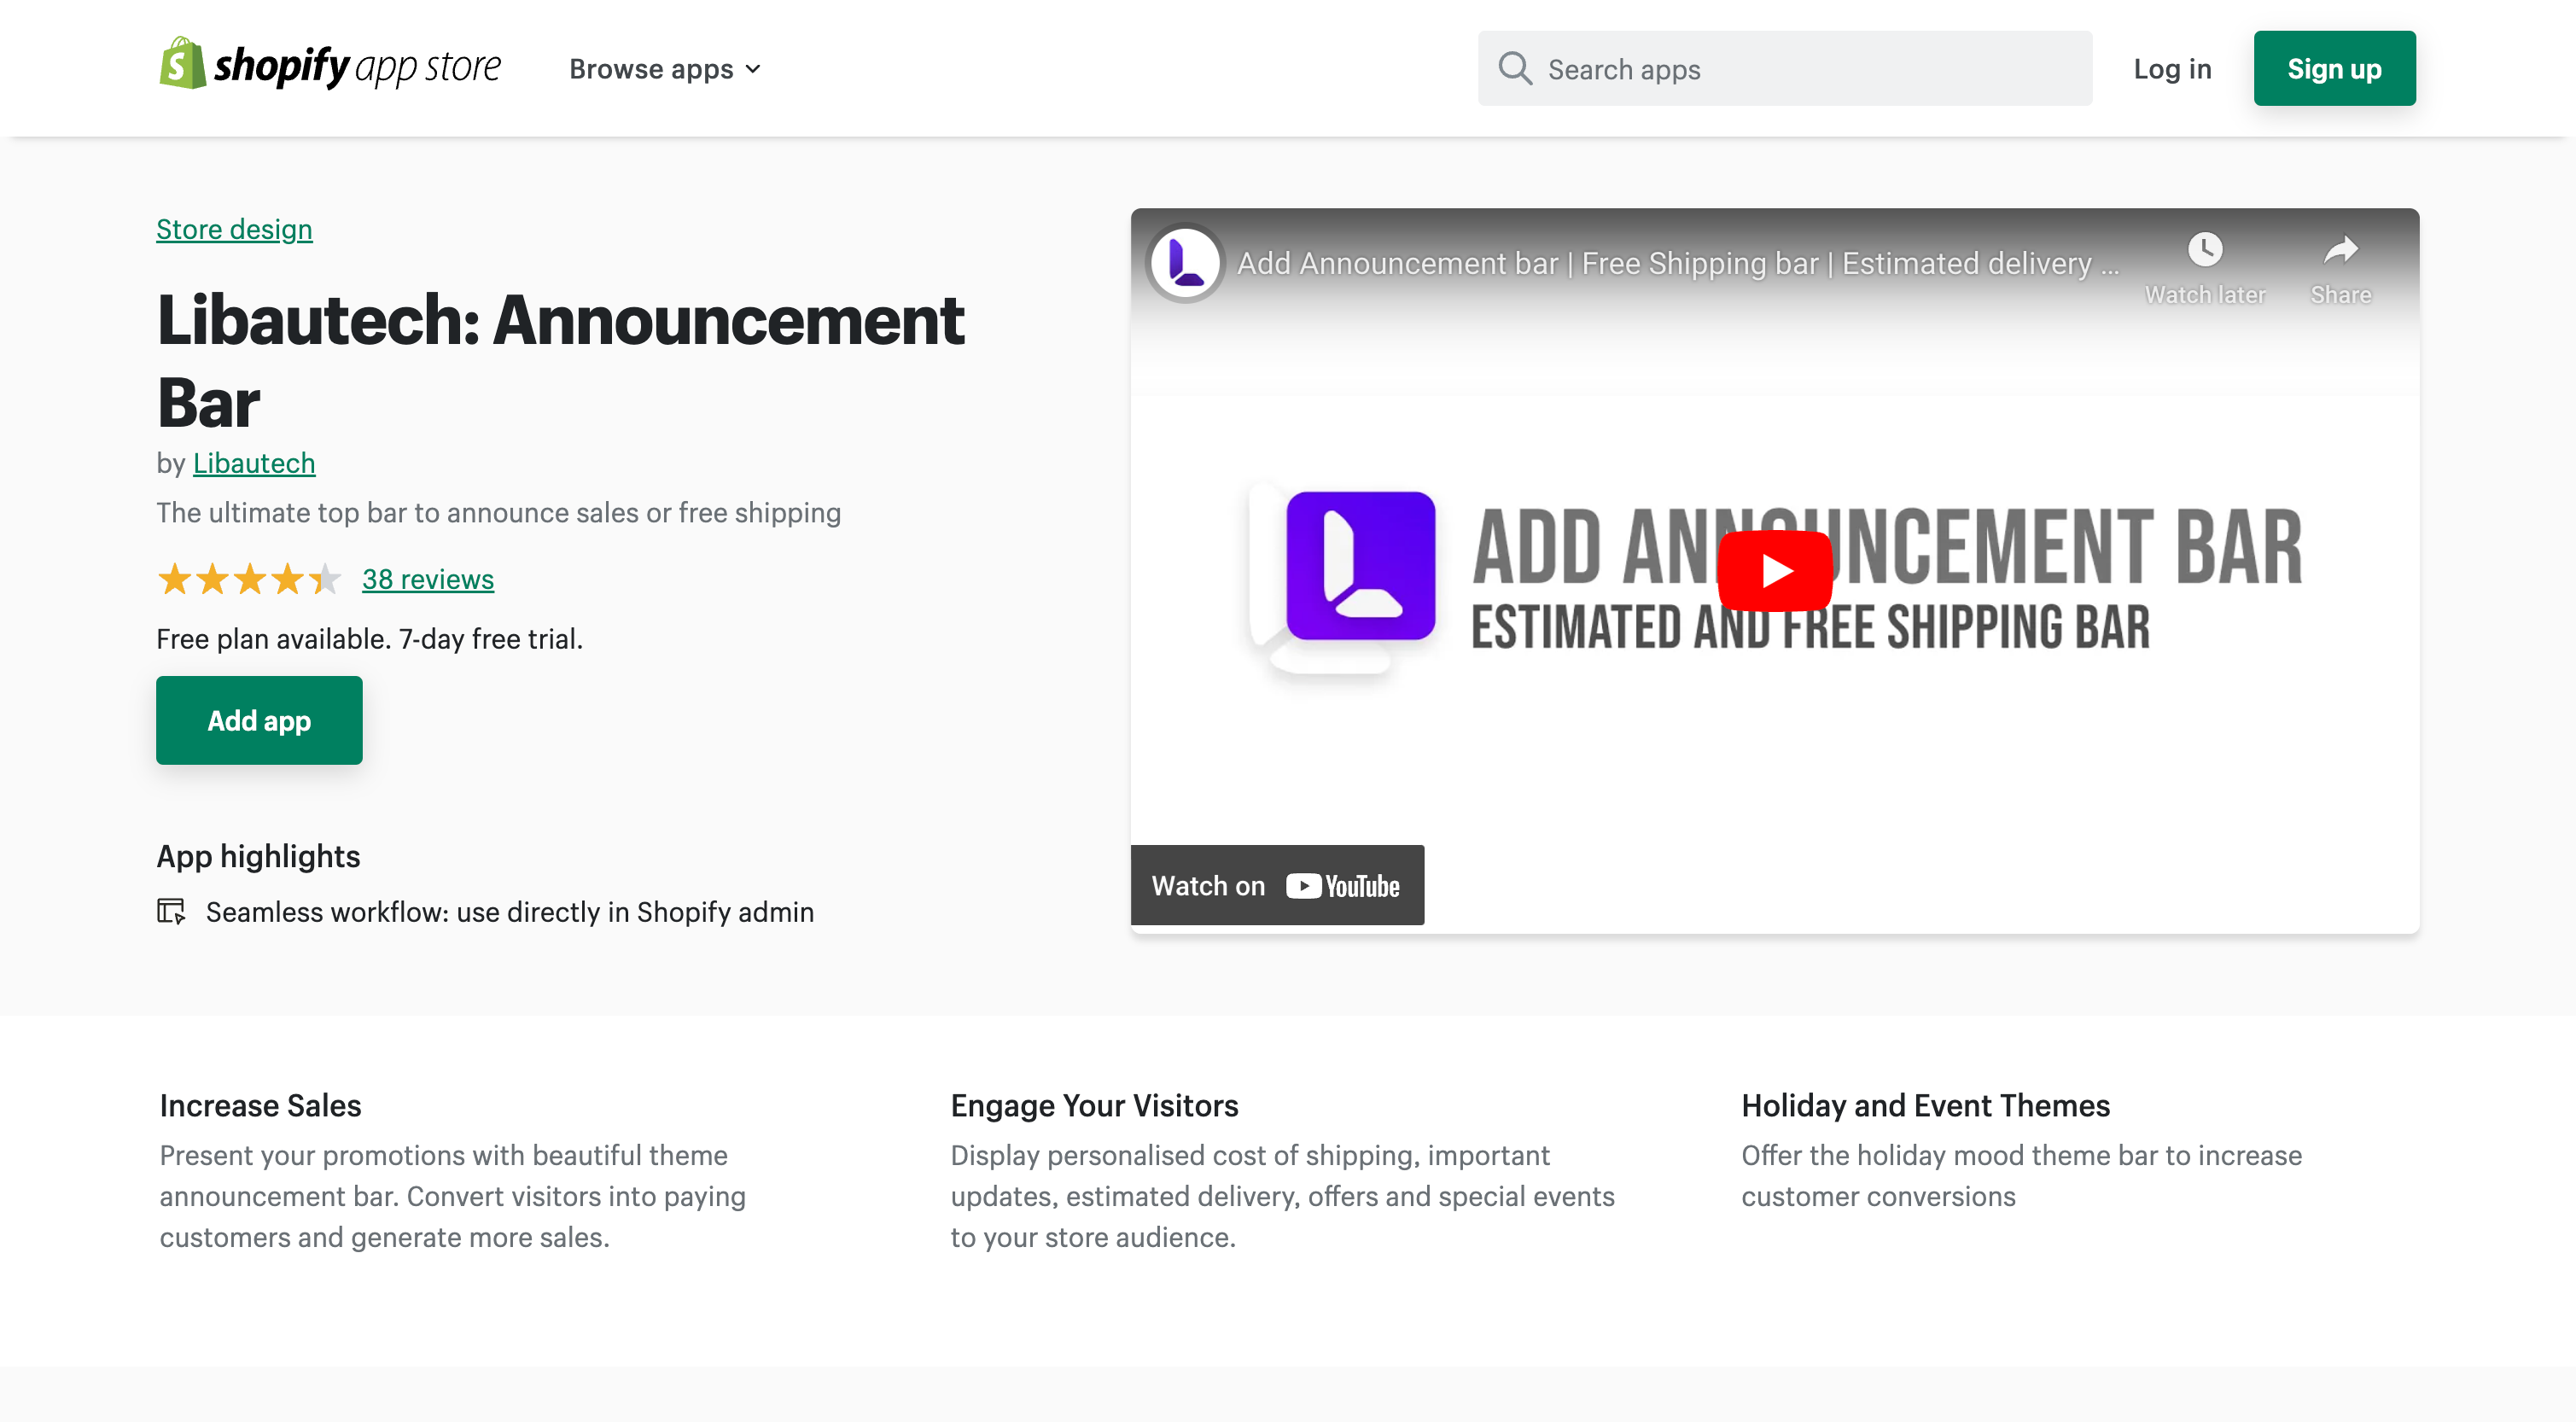 Announcement Bar - The ultimate top bar to announce sales or free shipping | Shopify Apps Store